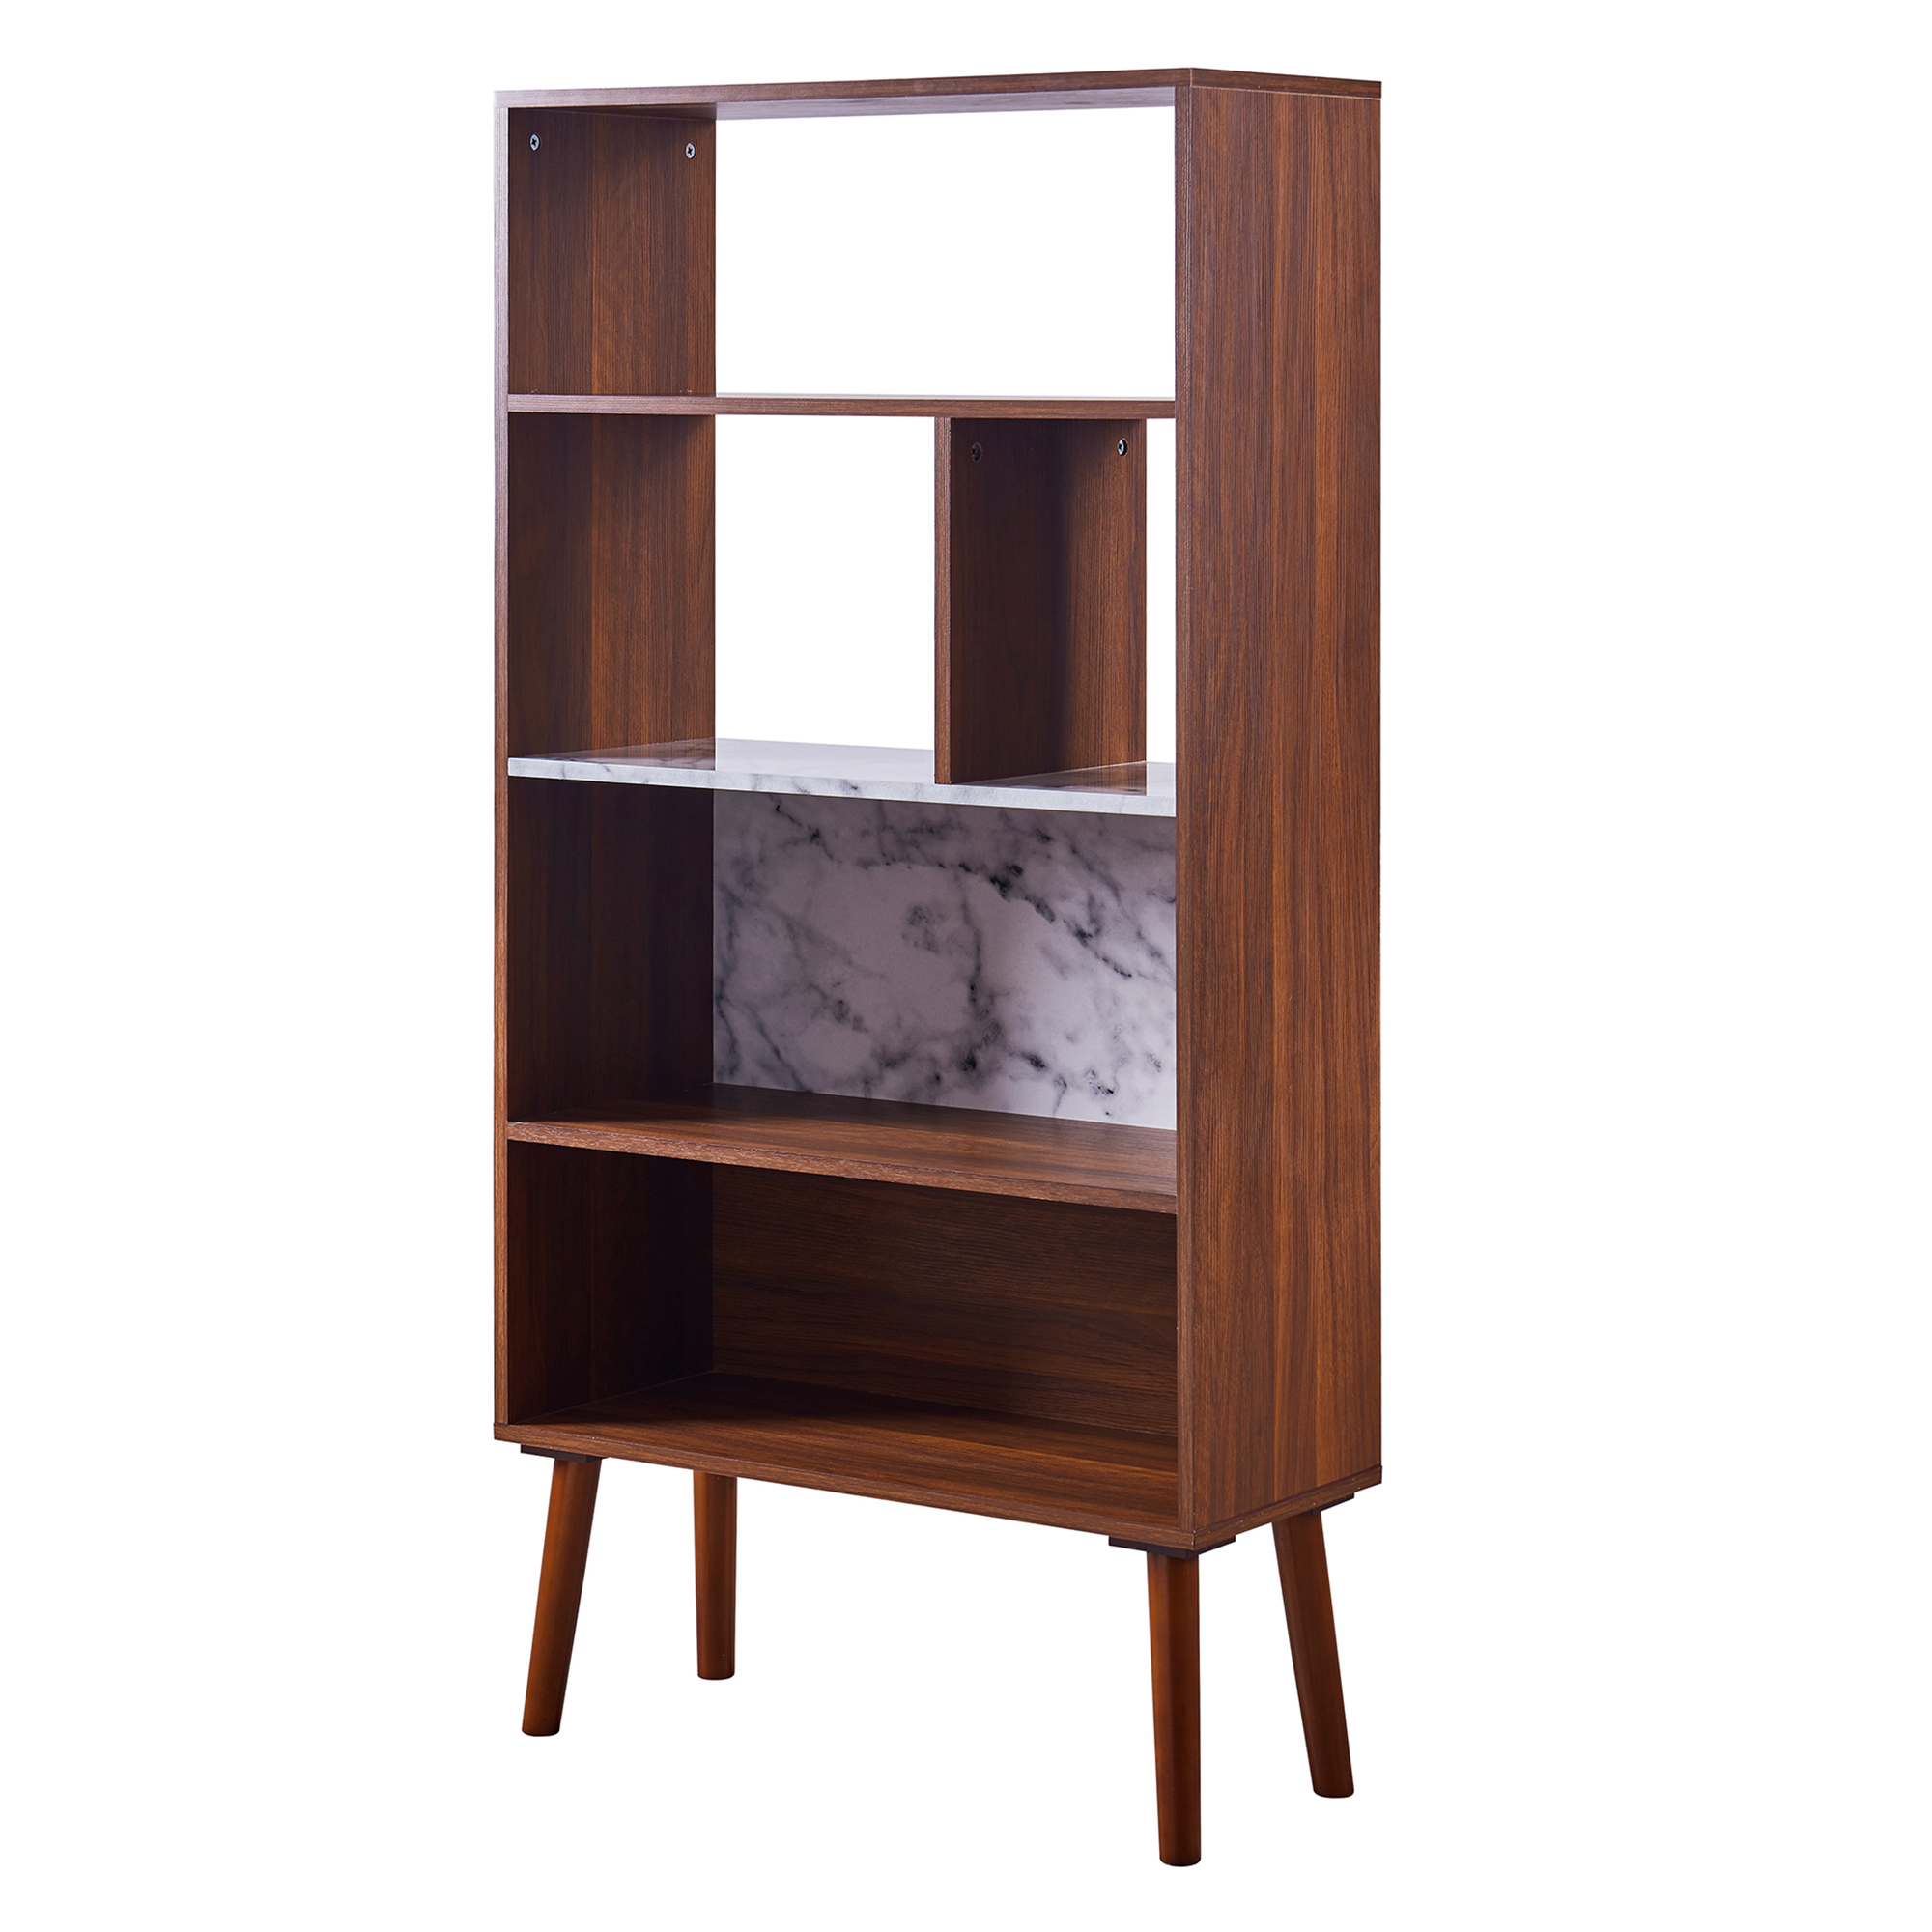 Teamson Home Kingston Wooden Bookcase with Faux Marble Shelf & Accents, White/Walnut - image 1 of 8